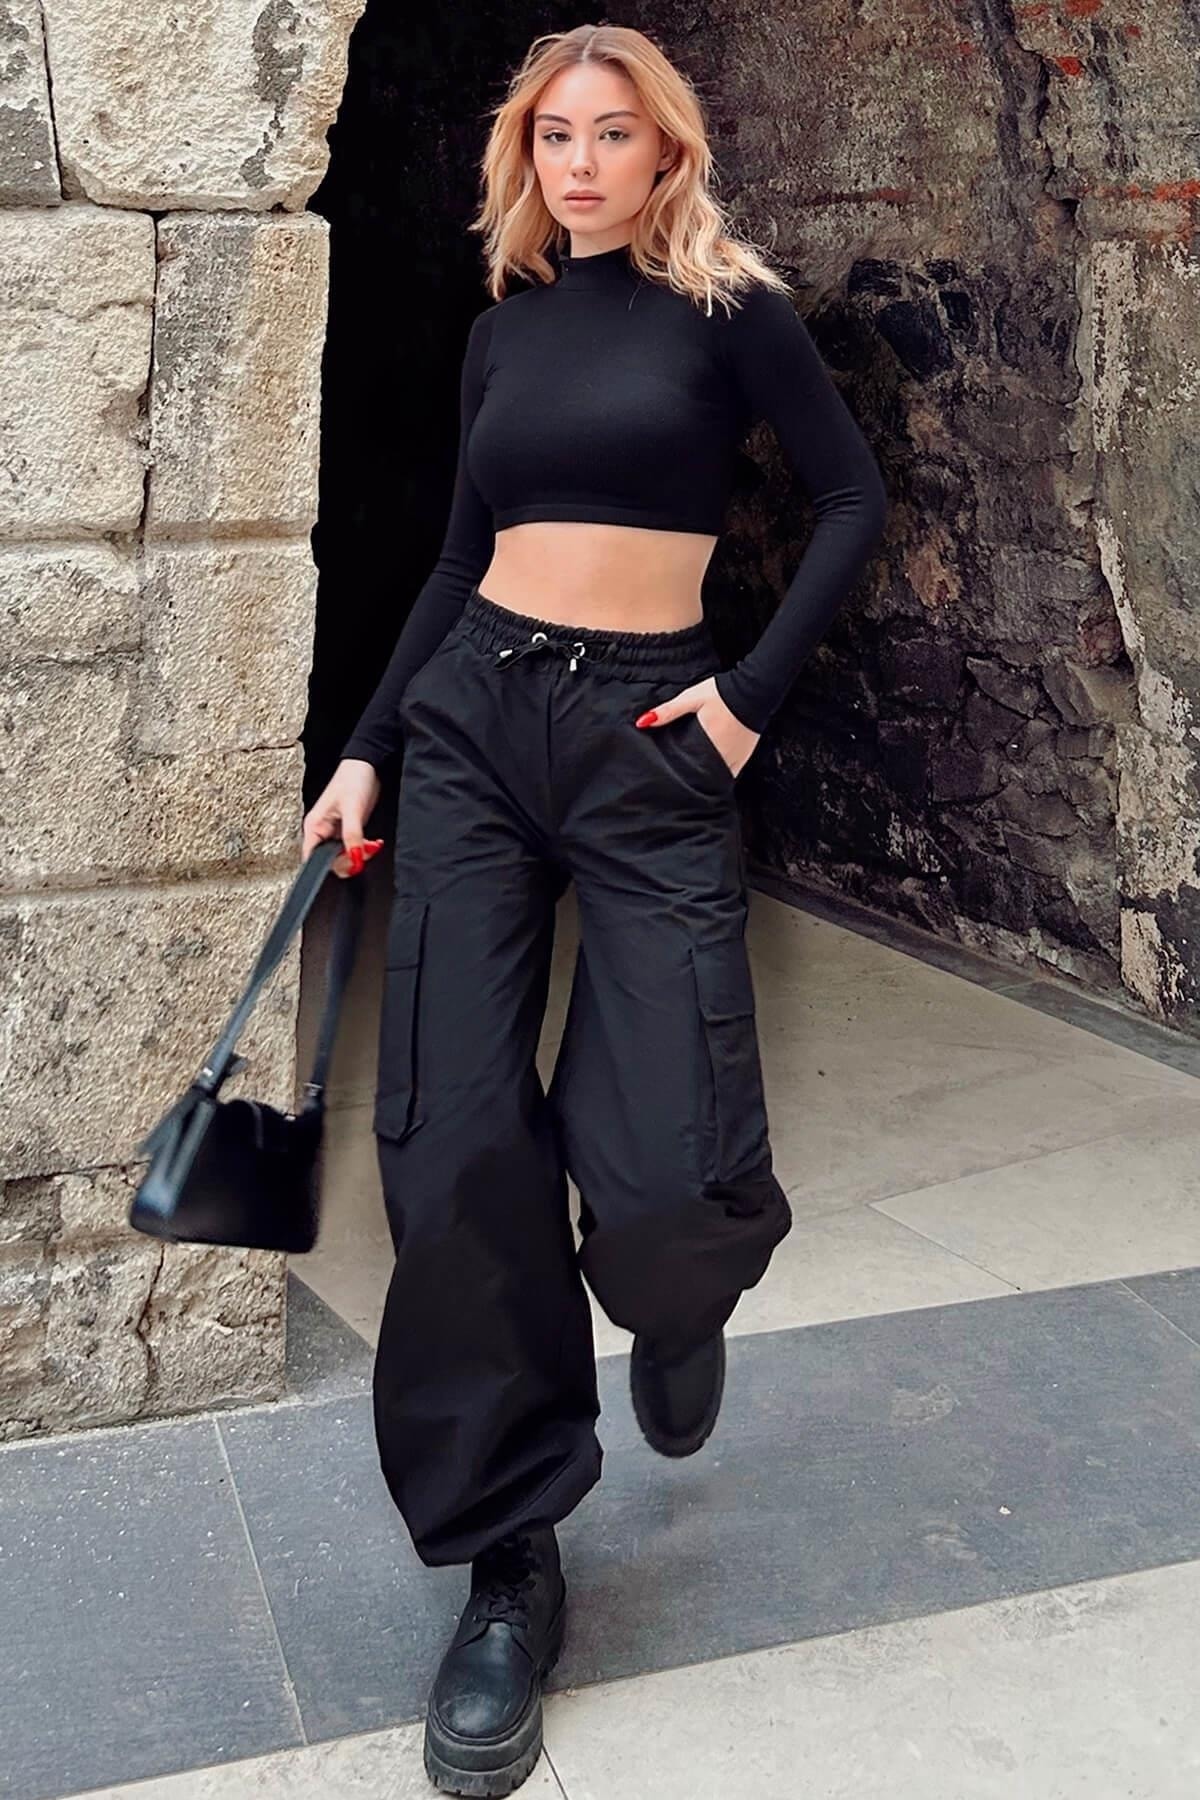 Custom Fashion Lady Cotton Straight Leg Women Trousers Cargo Track Pants  Casual Pants - China Pants and Women Pants price | Made-in-China.com